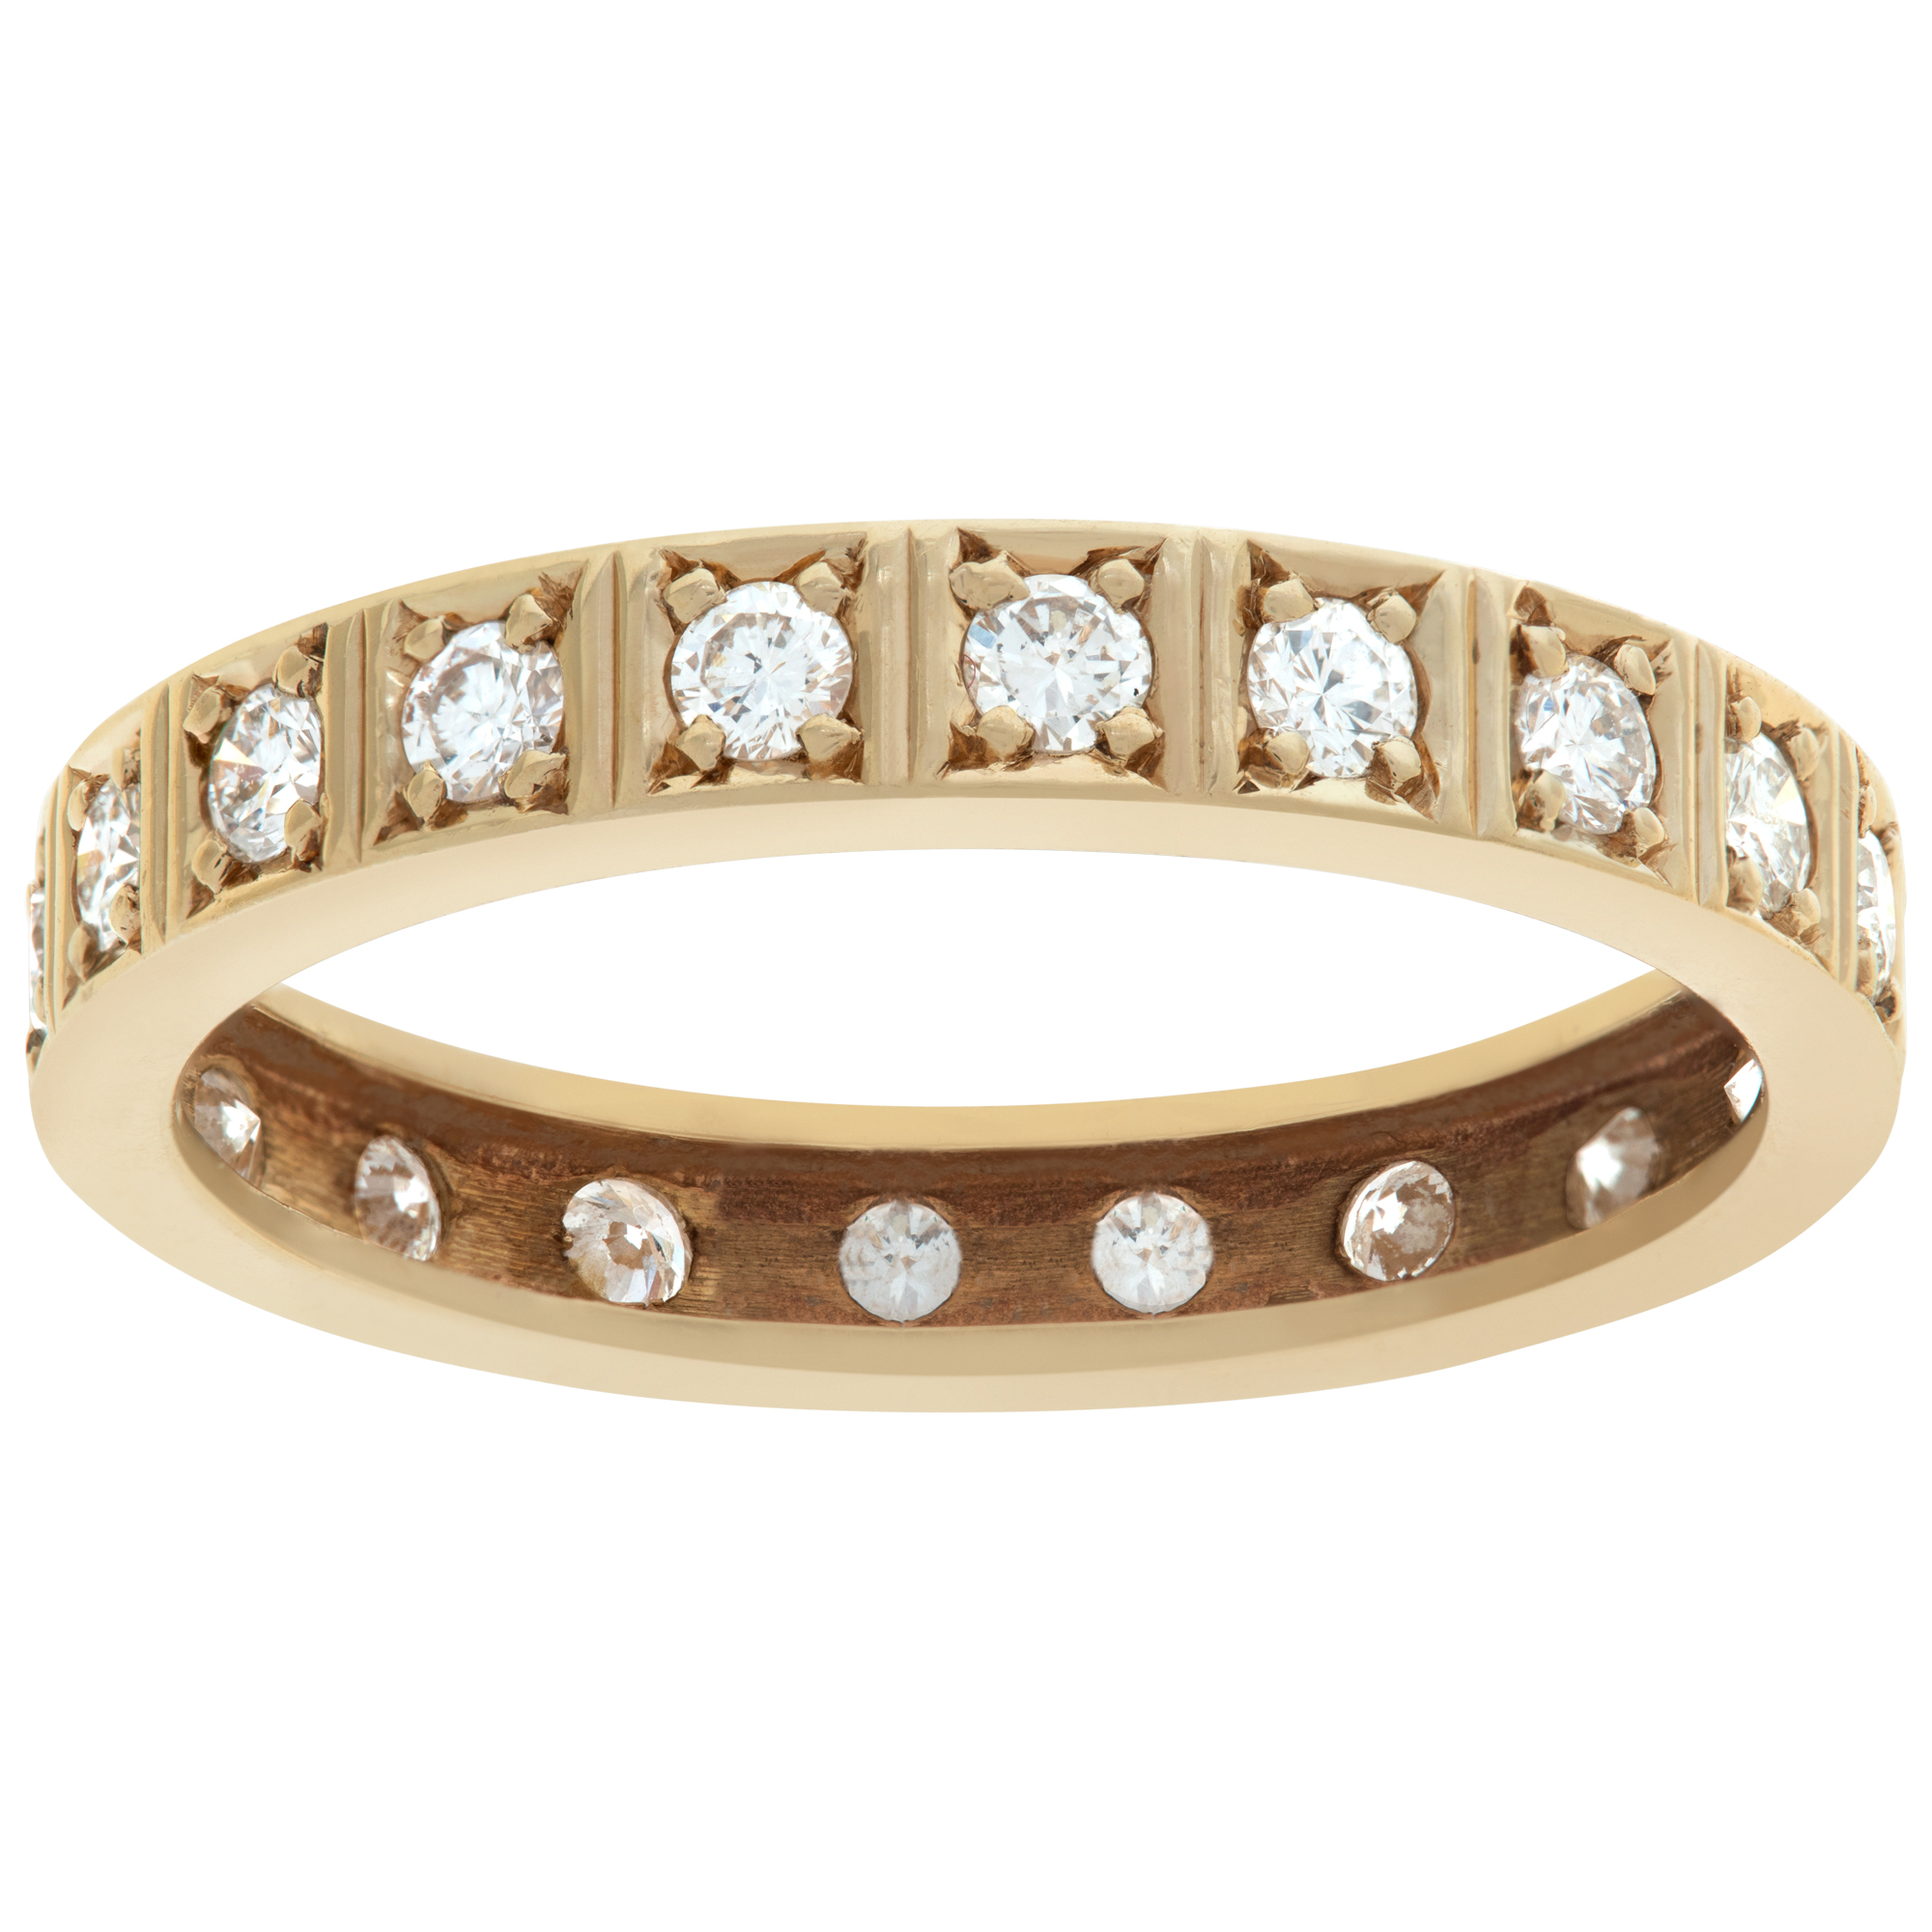 Adorable 14k yellow gold Eternity band with diamonds